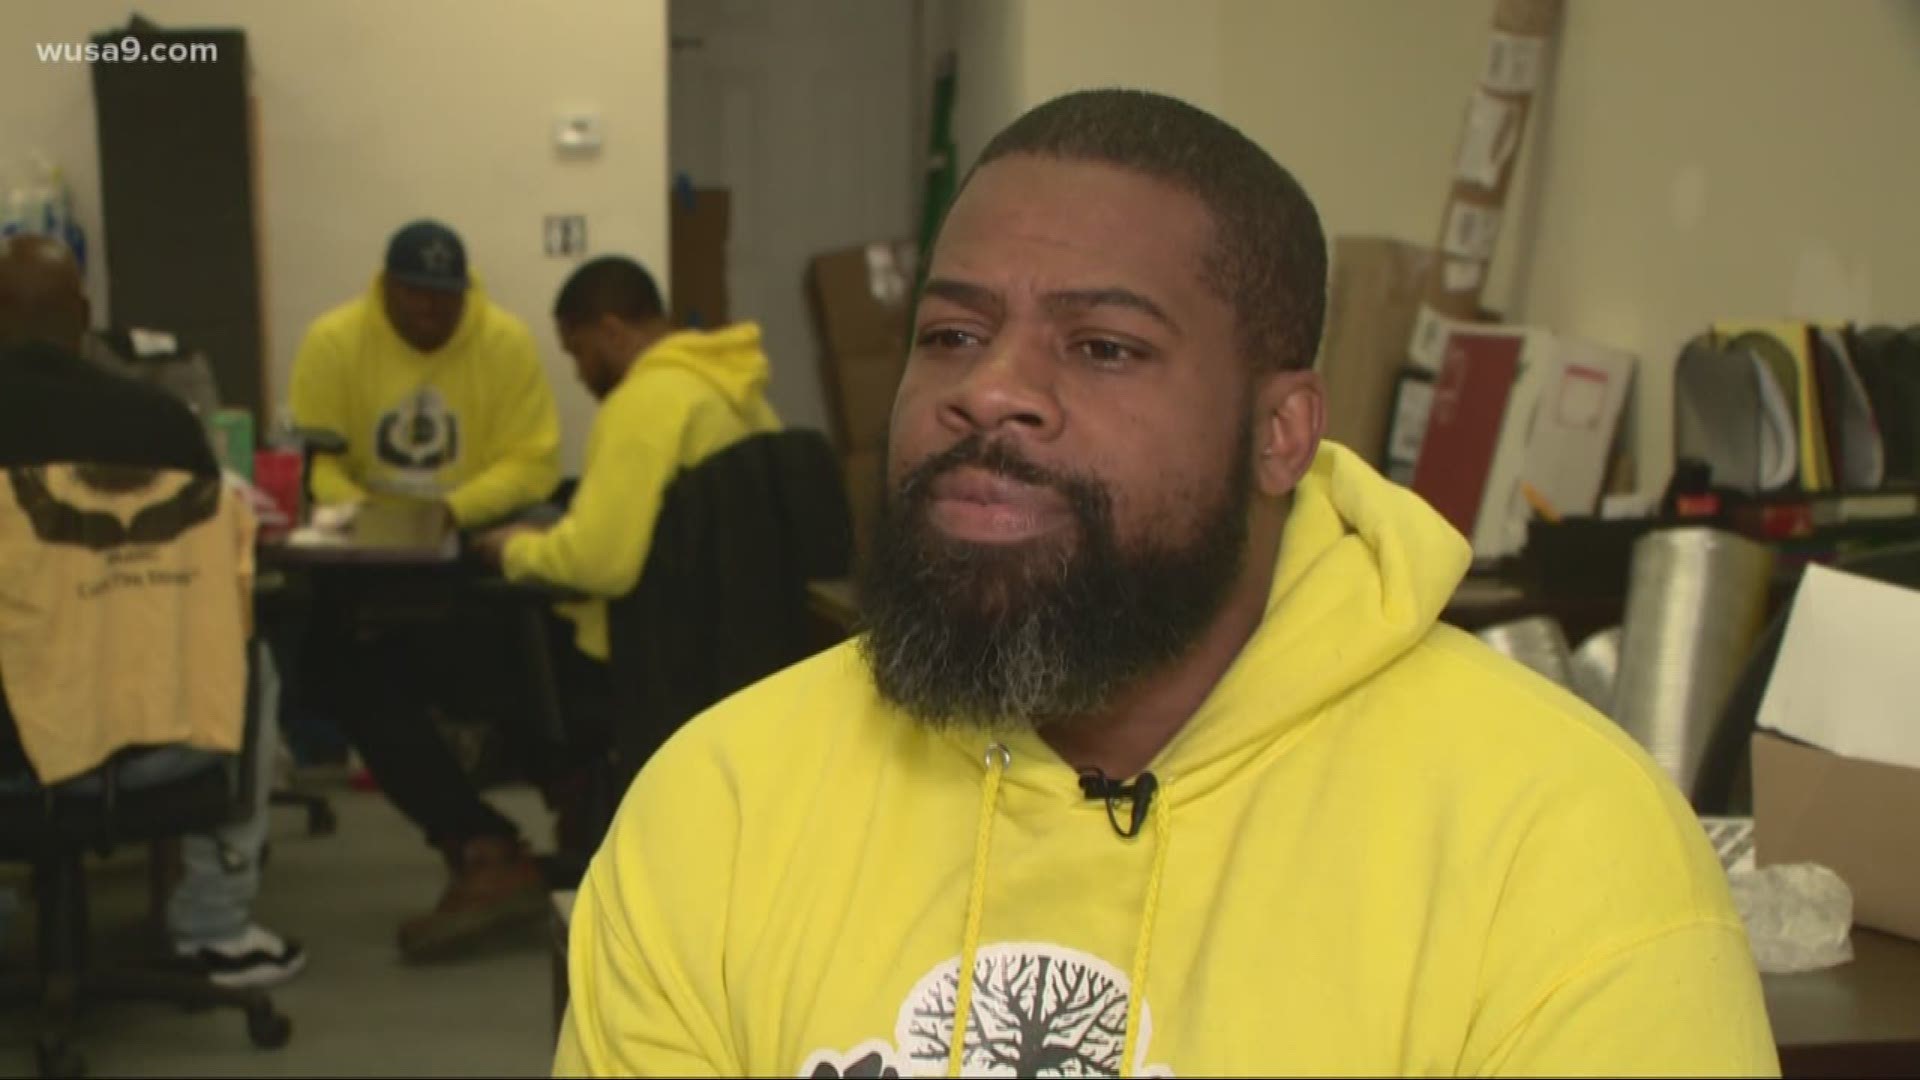 D.C. leaders have hired Violence Interrupters to help fight the District's wave of violent crime. WUSA 9 looks at who is fighting to "Cure the Streets."